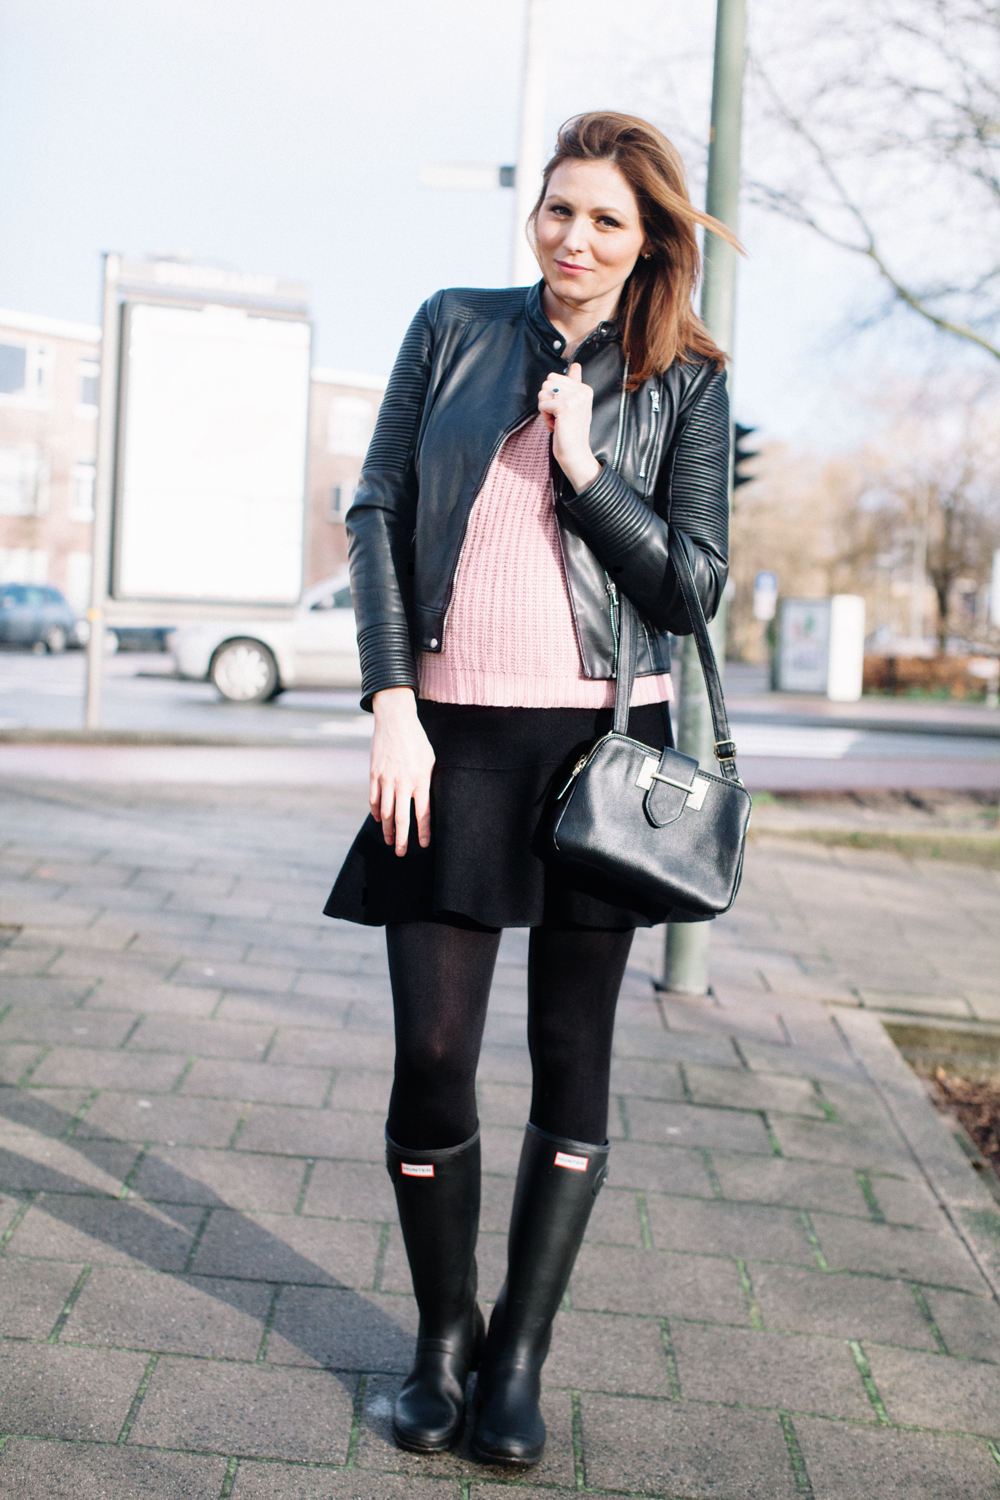 Black and Pink Outfit for Fall featured by top US fashion blog, Tea Cups & Tulips: image of a woman wearing Black leather jacket and light pink sweater